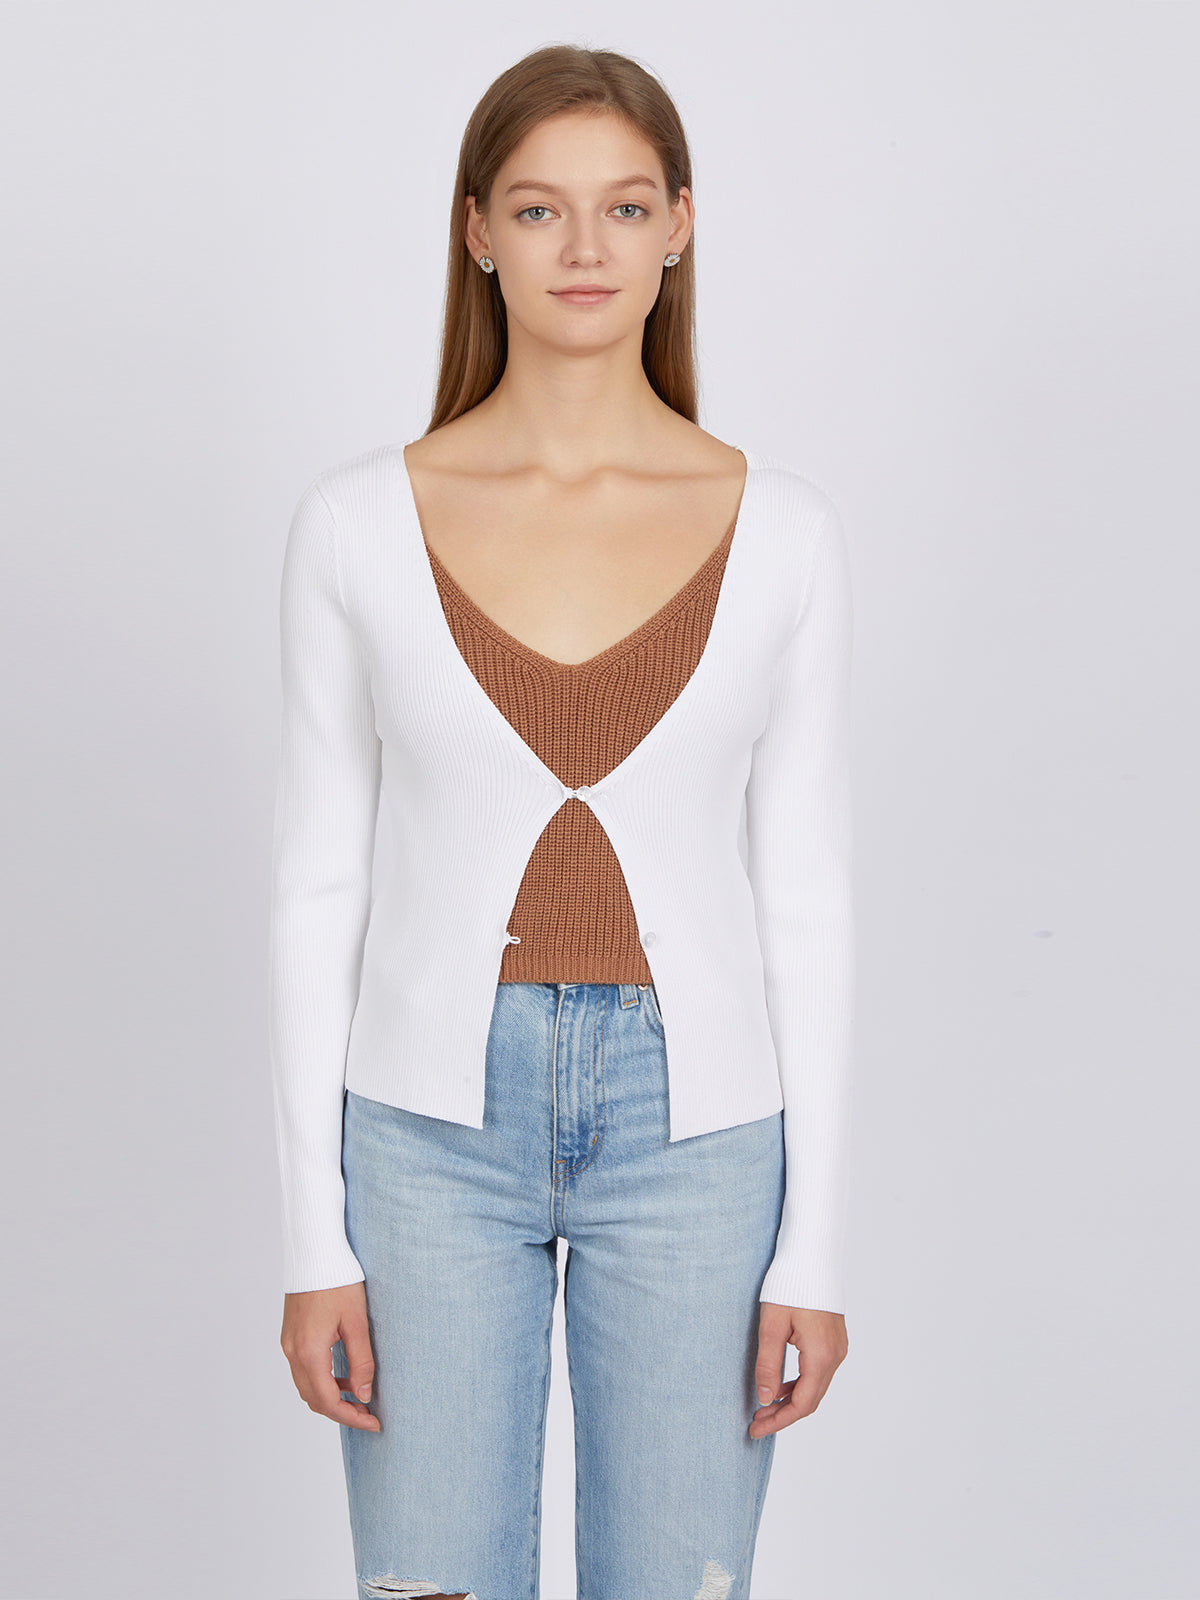 Jess Button Front Cropped Cardi - Bleach White